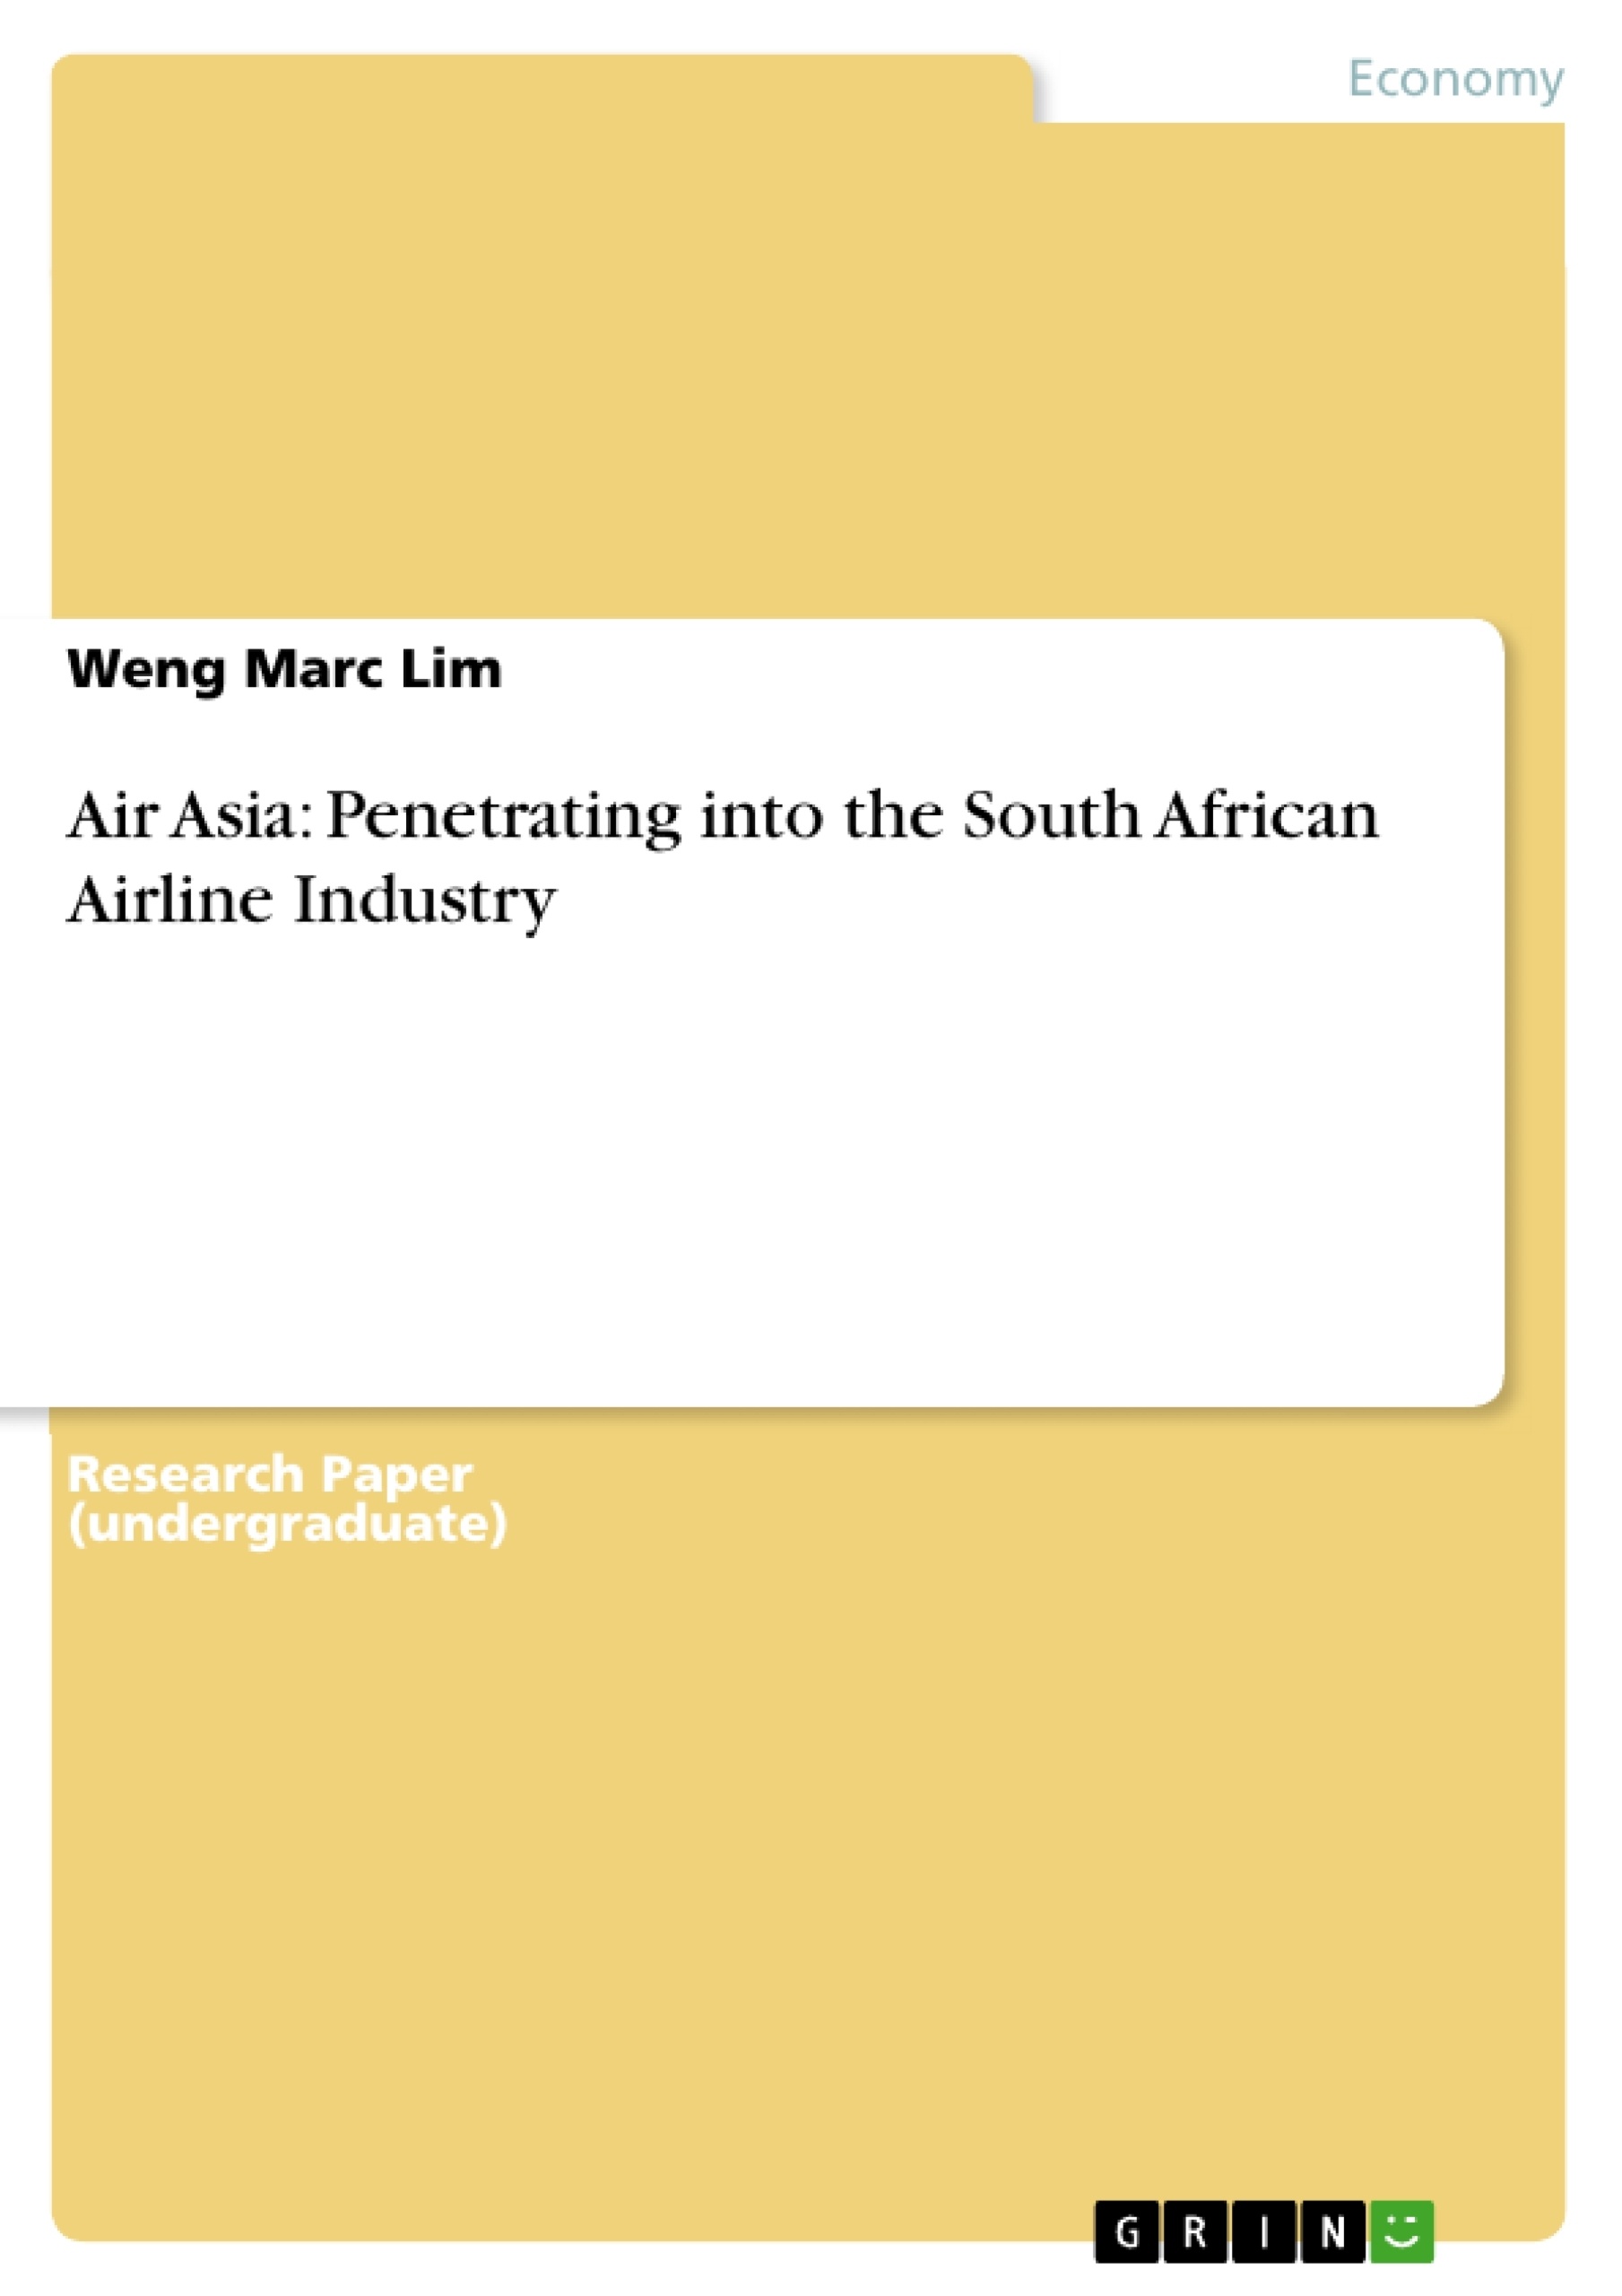 Titre: Air Asia: Penetrating into the South African Airline Industry